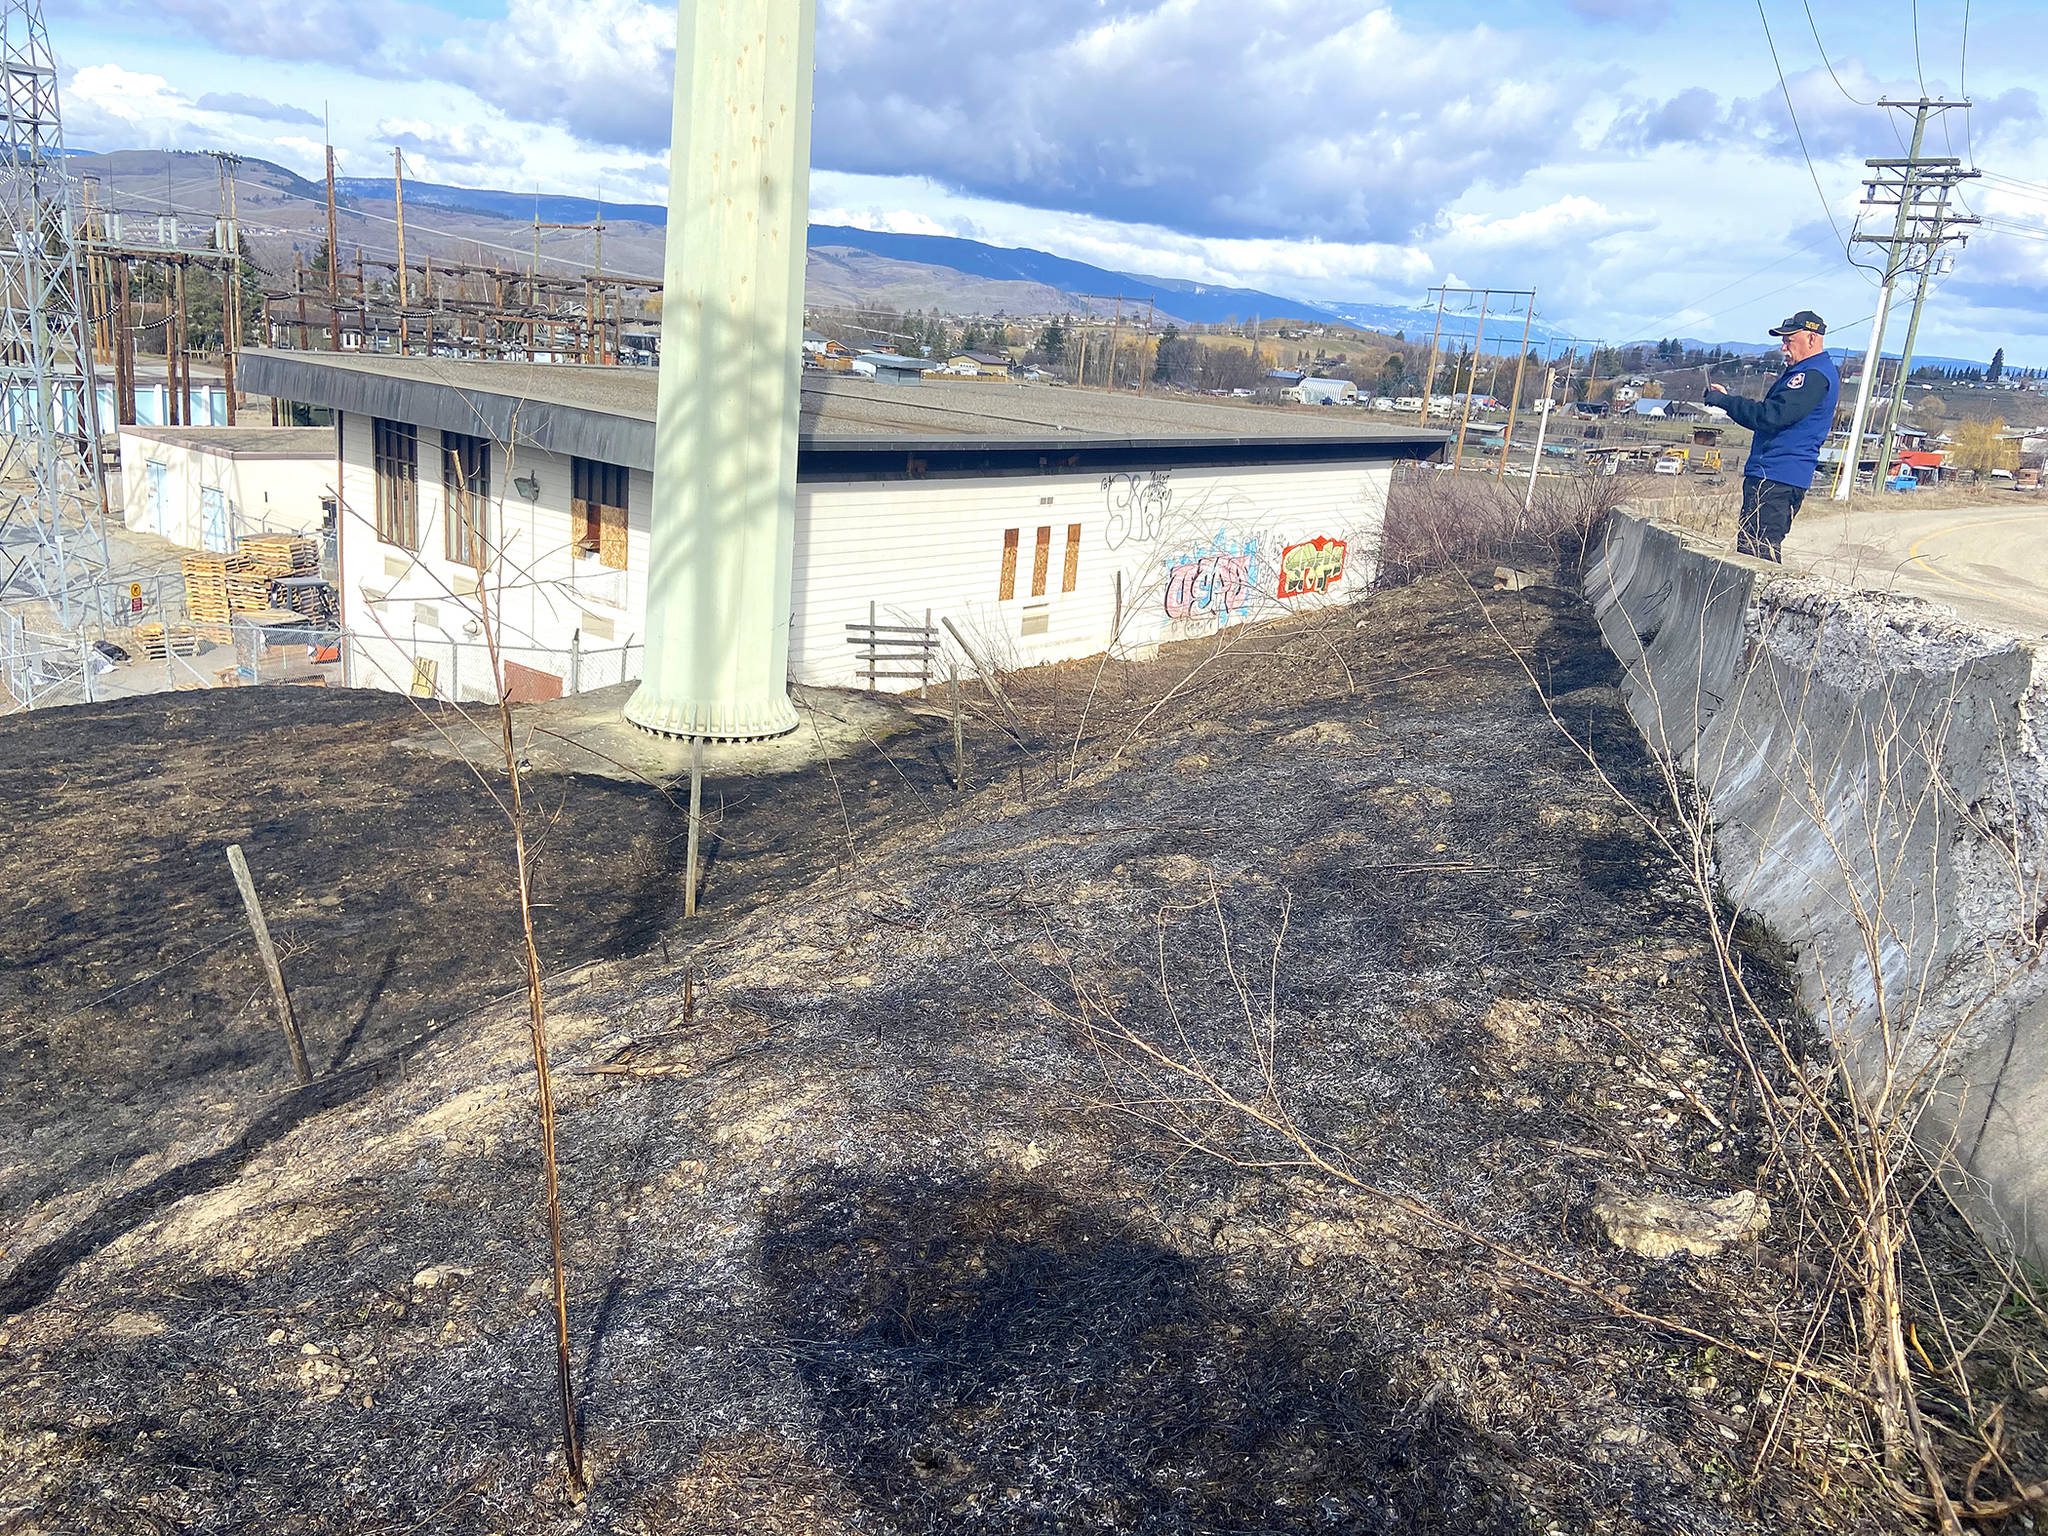 BX-Swan Lake fire chief Bill Wacey investigates a suspicious grass fire, which was sparked next to the BC Hydro substation early Monday, March 22, 2021. (Jennifer Smith - Morning Star)